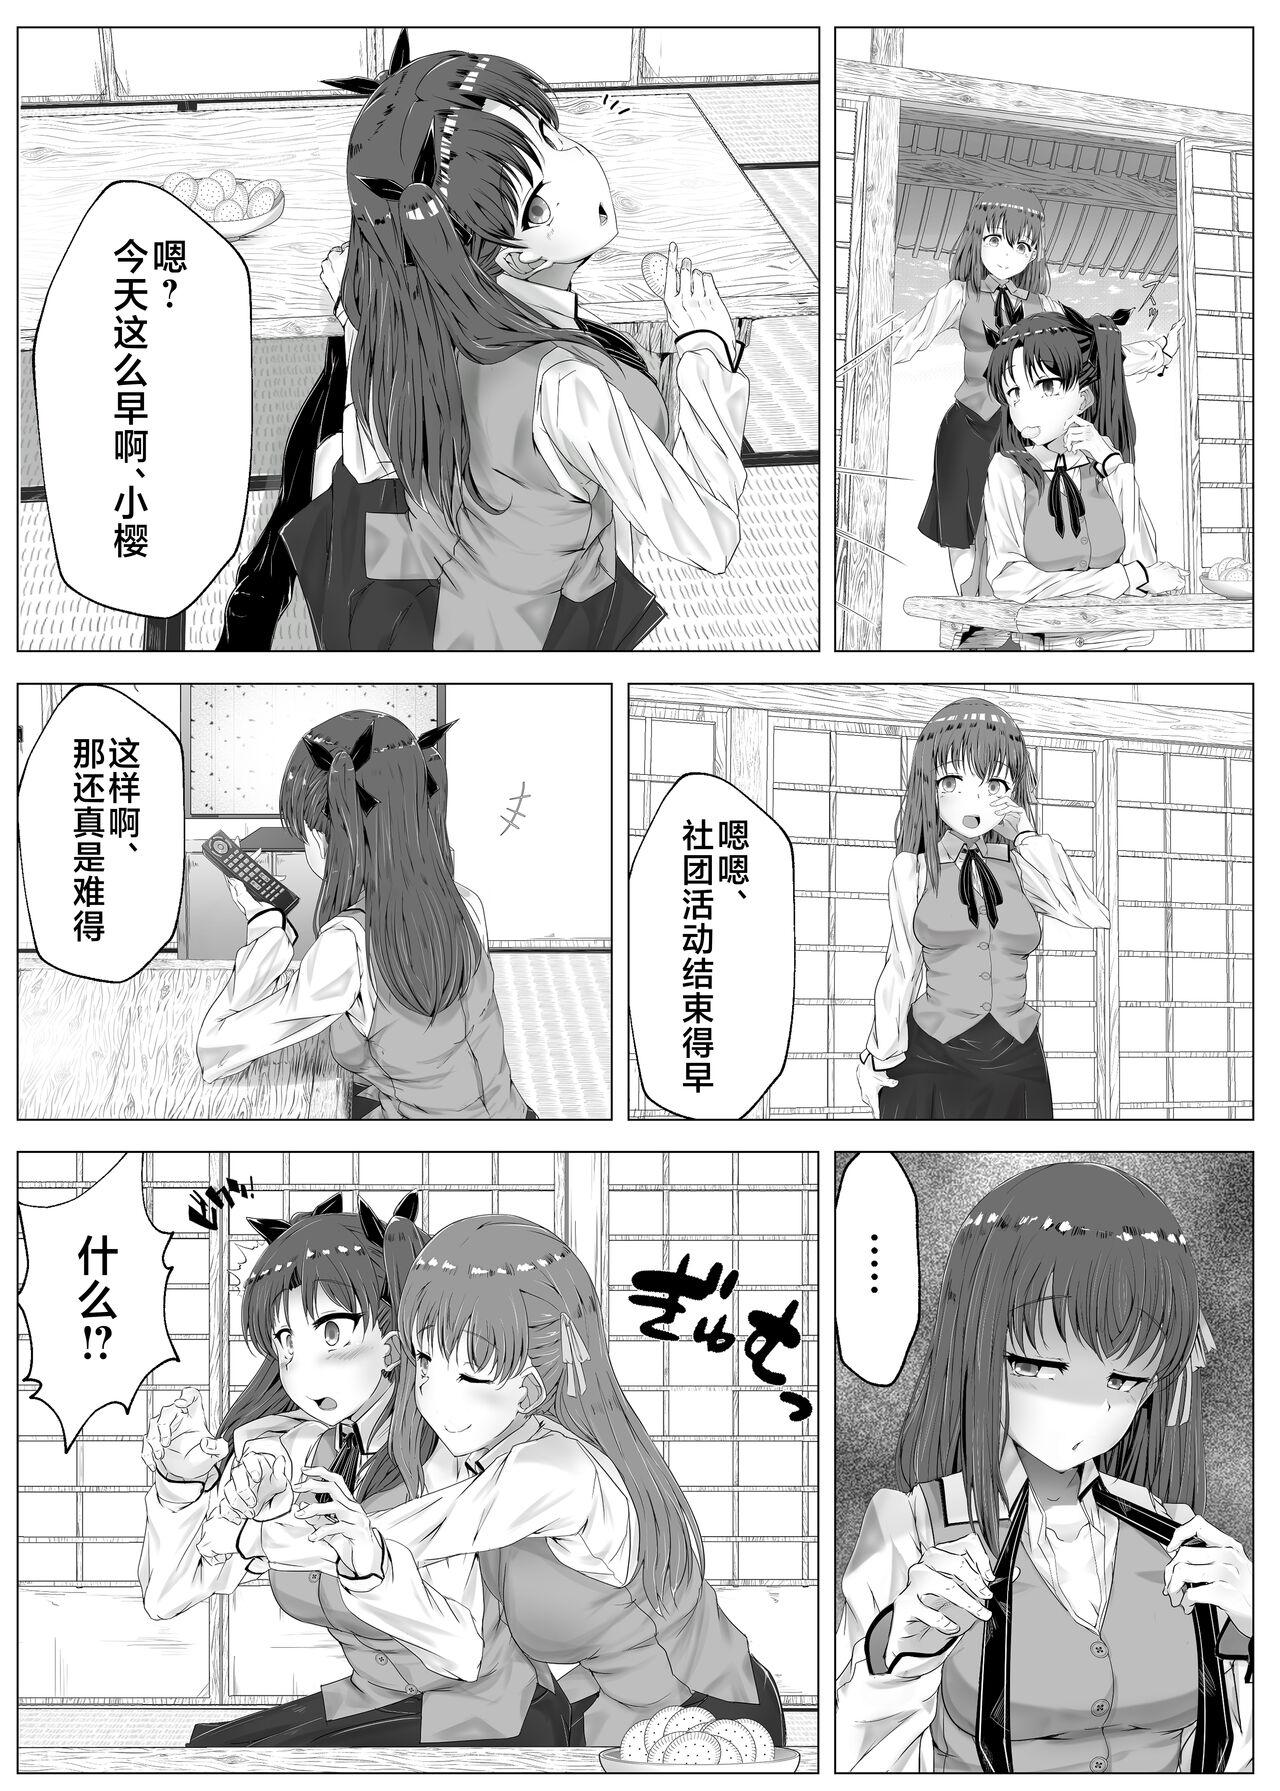 Transexual 遠坂凛乗り換え乗っ取り - Fate stay night Gay Skinny - Page 1